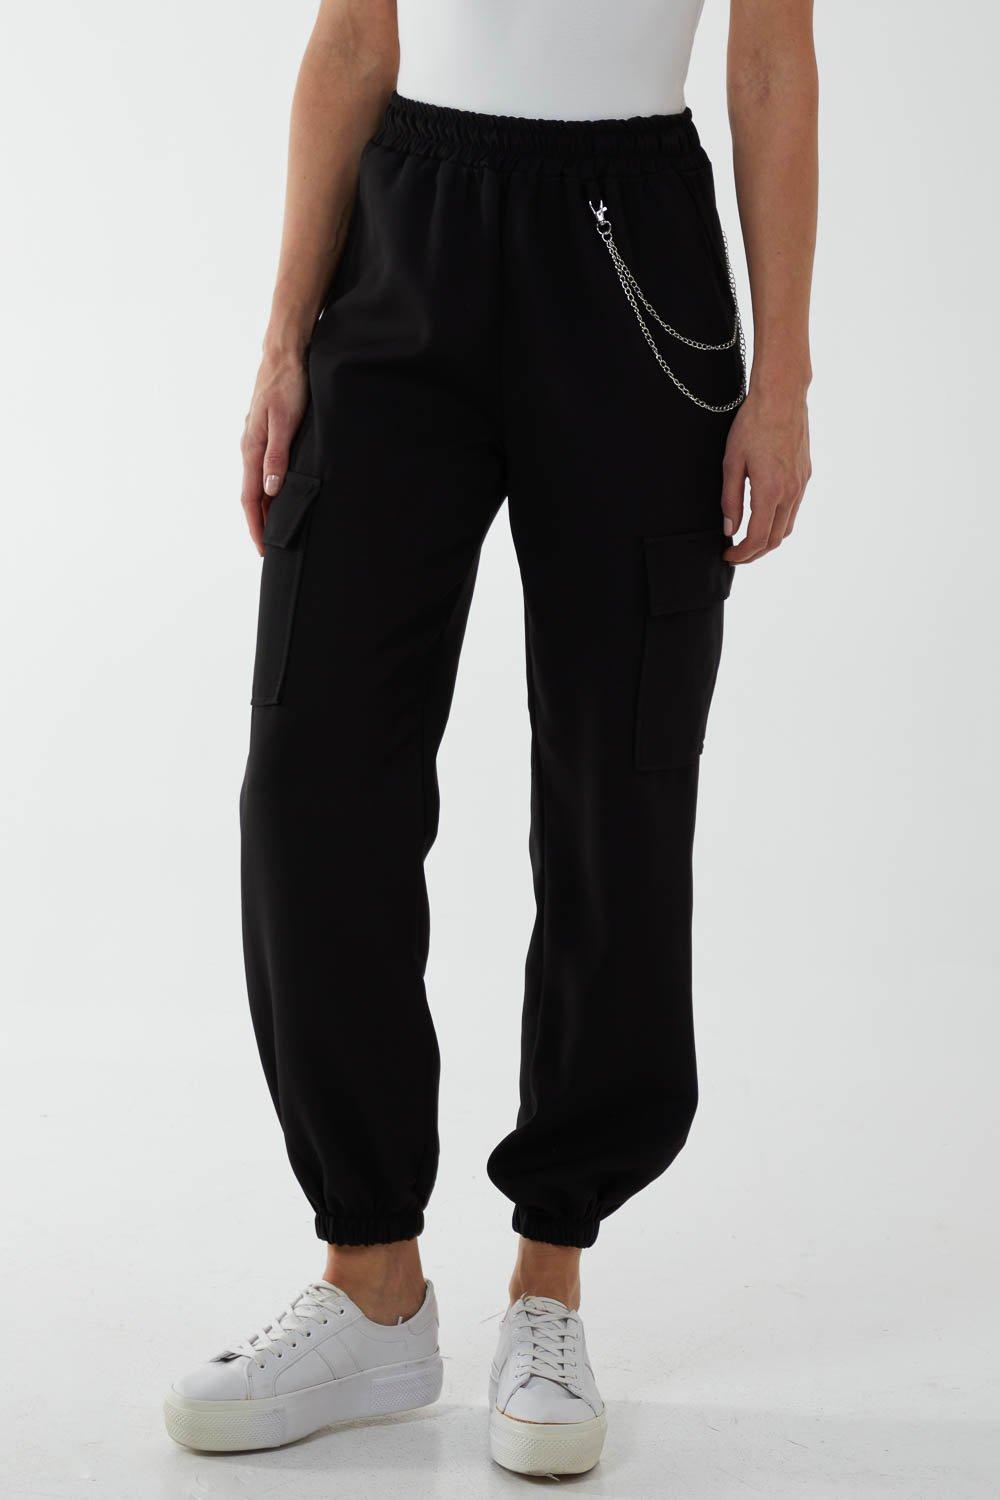 fcity.in - Stylish Double Pocket Chain Cargo Pant For Women / Classic  Graceful